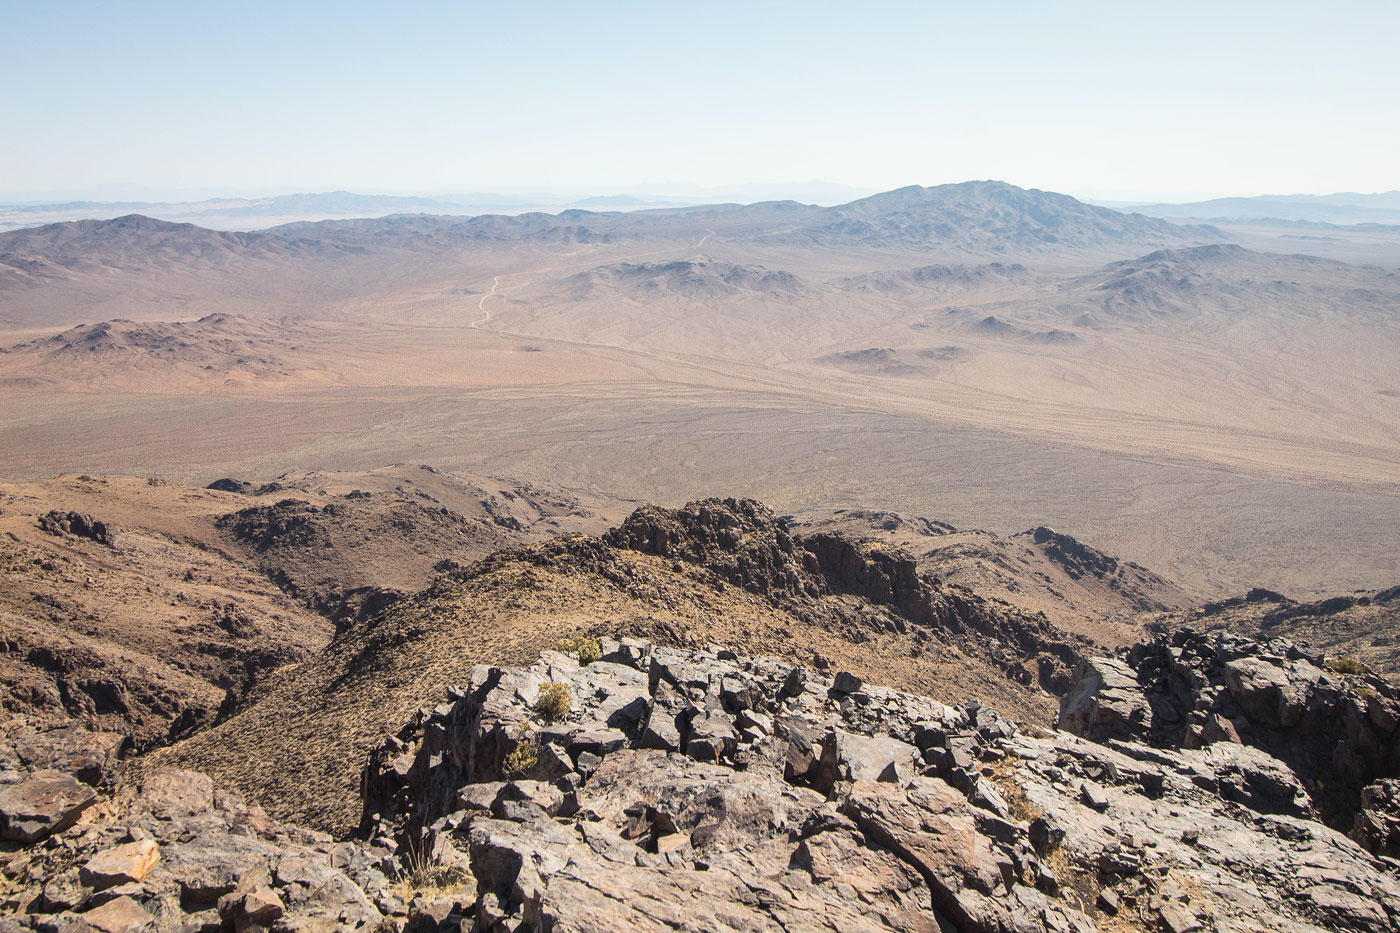 Hike East Ord Mountain in Ord Mountains BLM, California - Stav is Lost